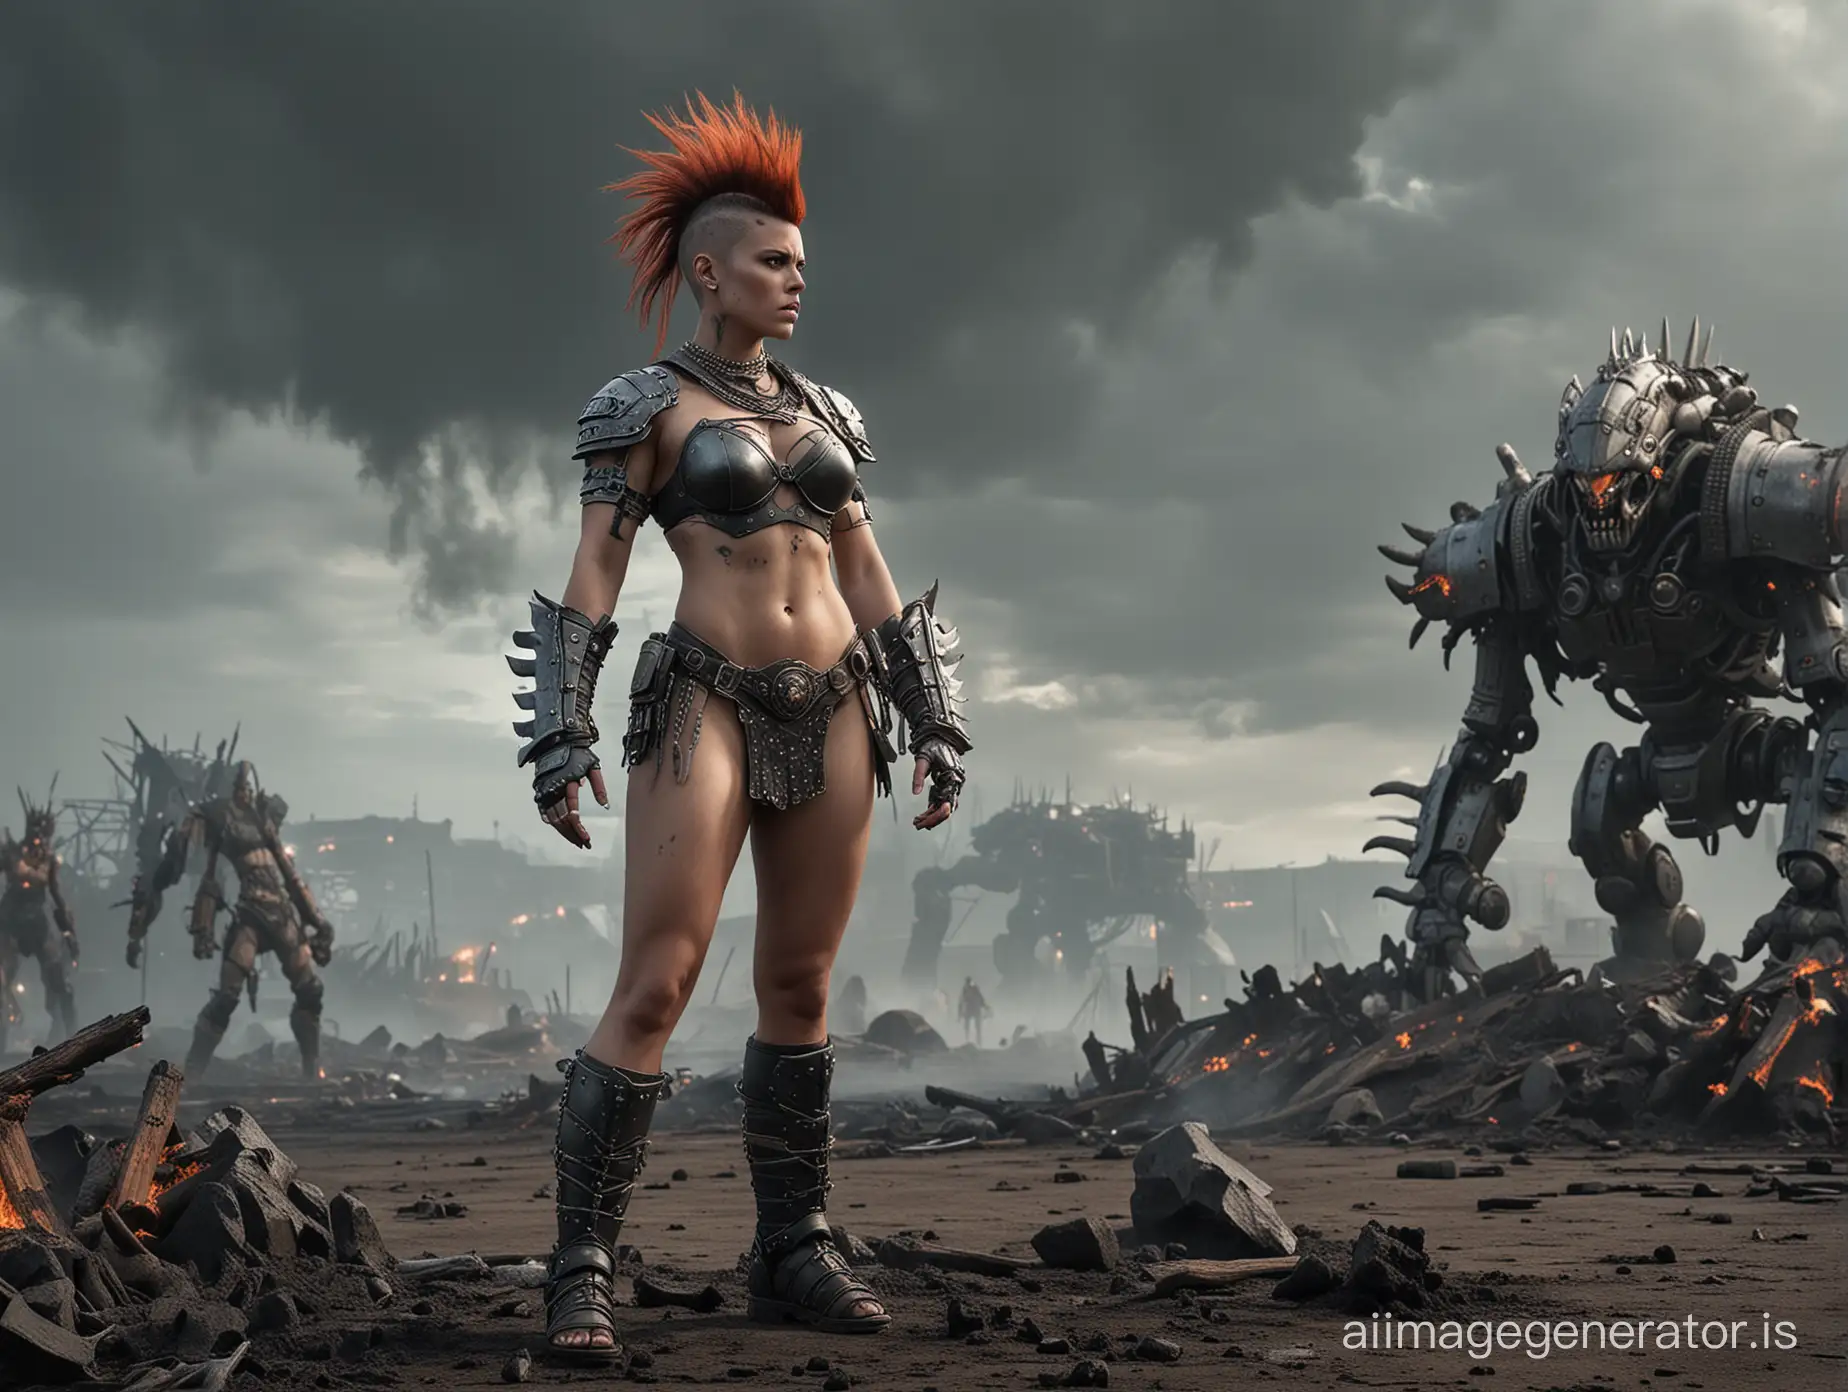 Barbarian-Girl-with-Mohawk-Stands-Victorious-Amidst-Slayed-Foes-on-Dark-Battlefield